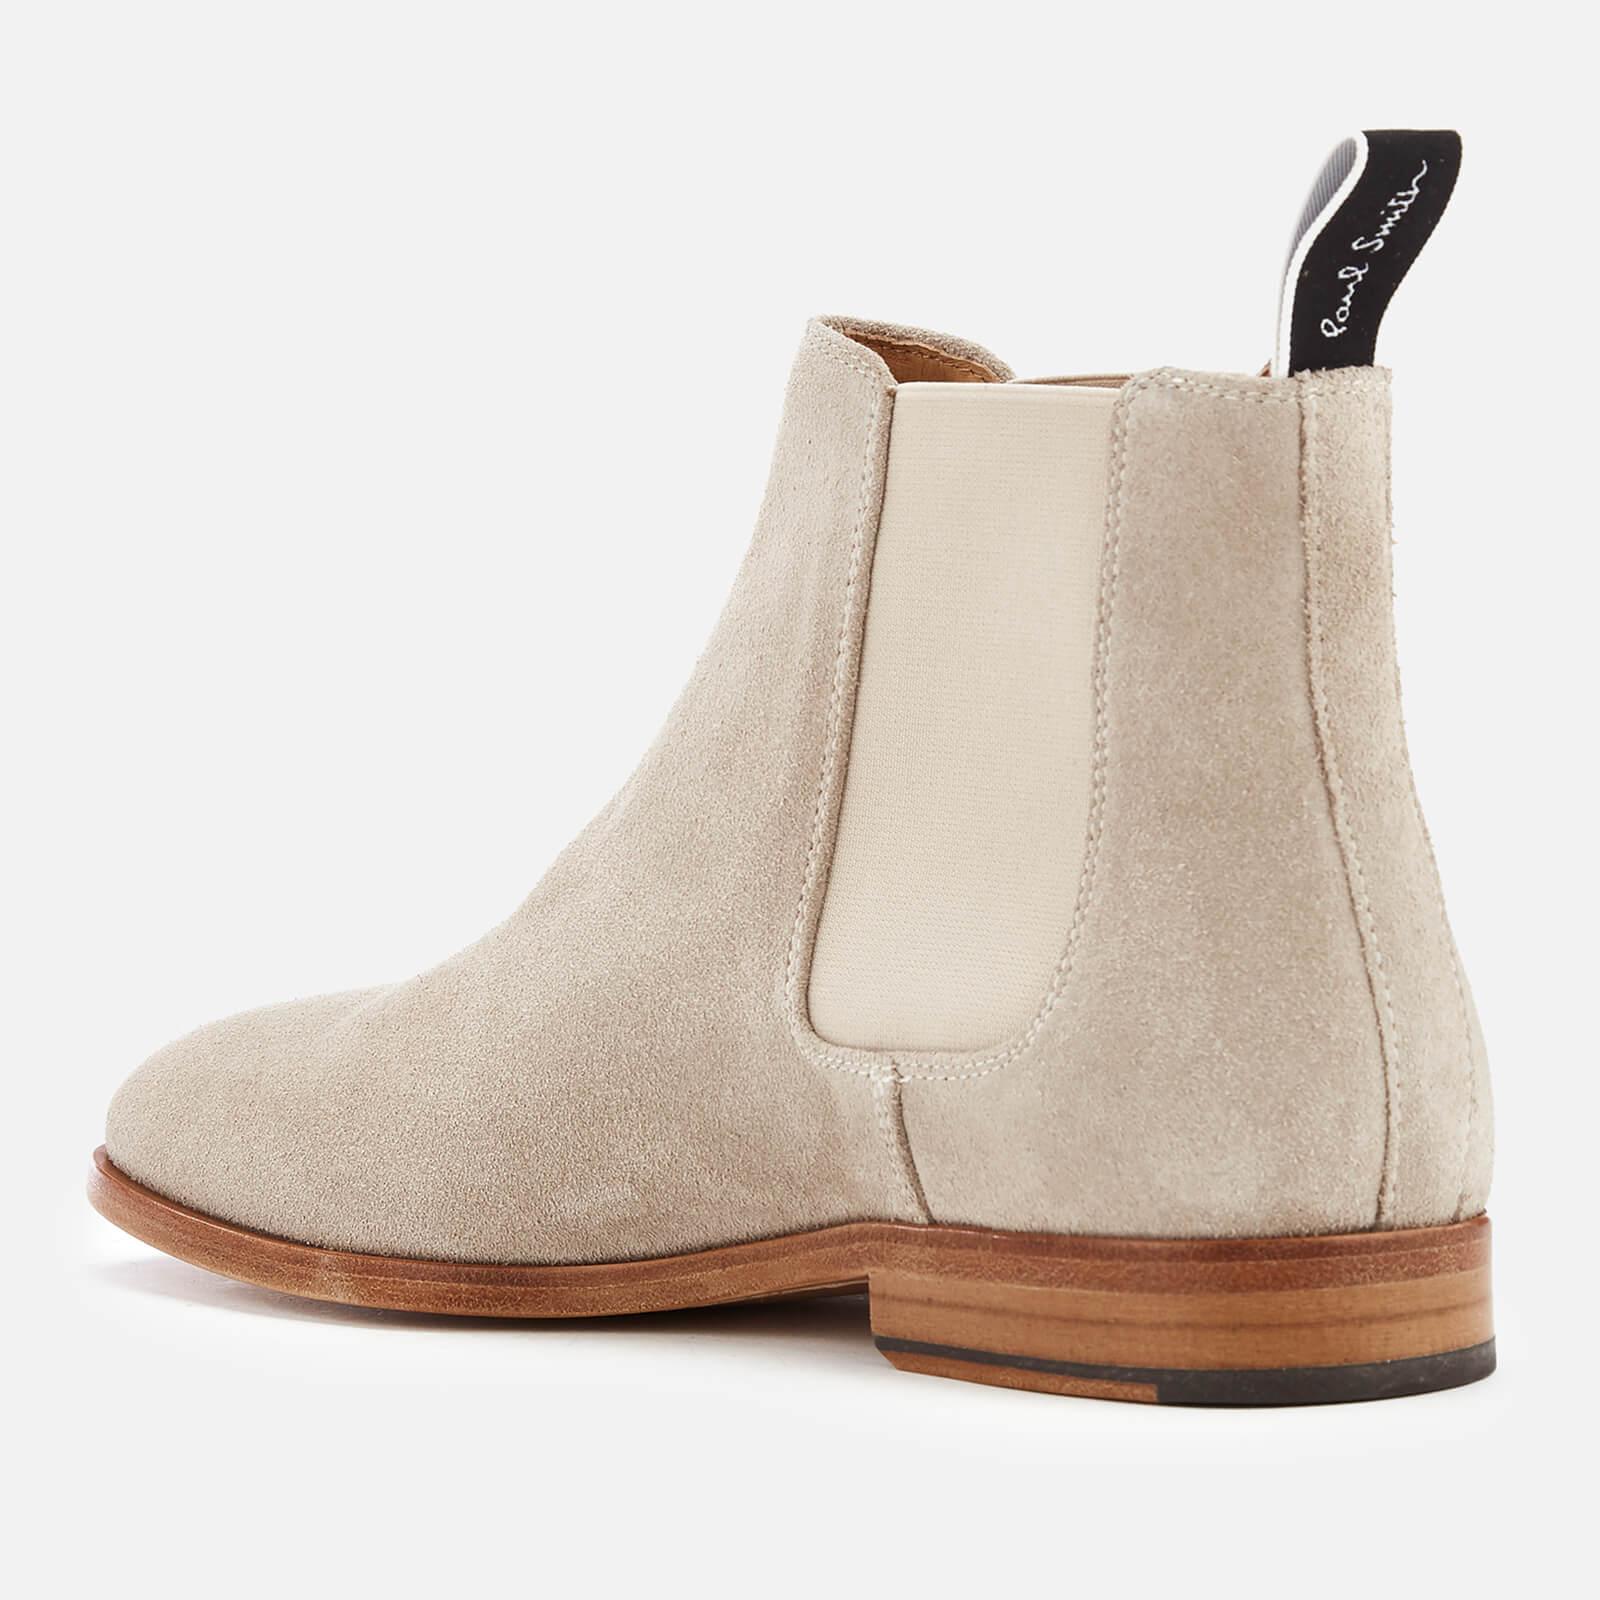 PS by Paul Smith Gerald Suede Chelsea Boots in Grey (Gray) for Men - Lyst